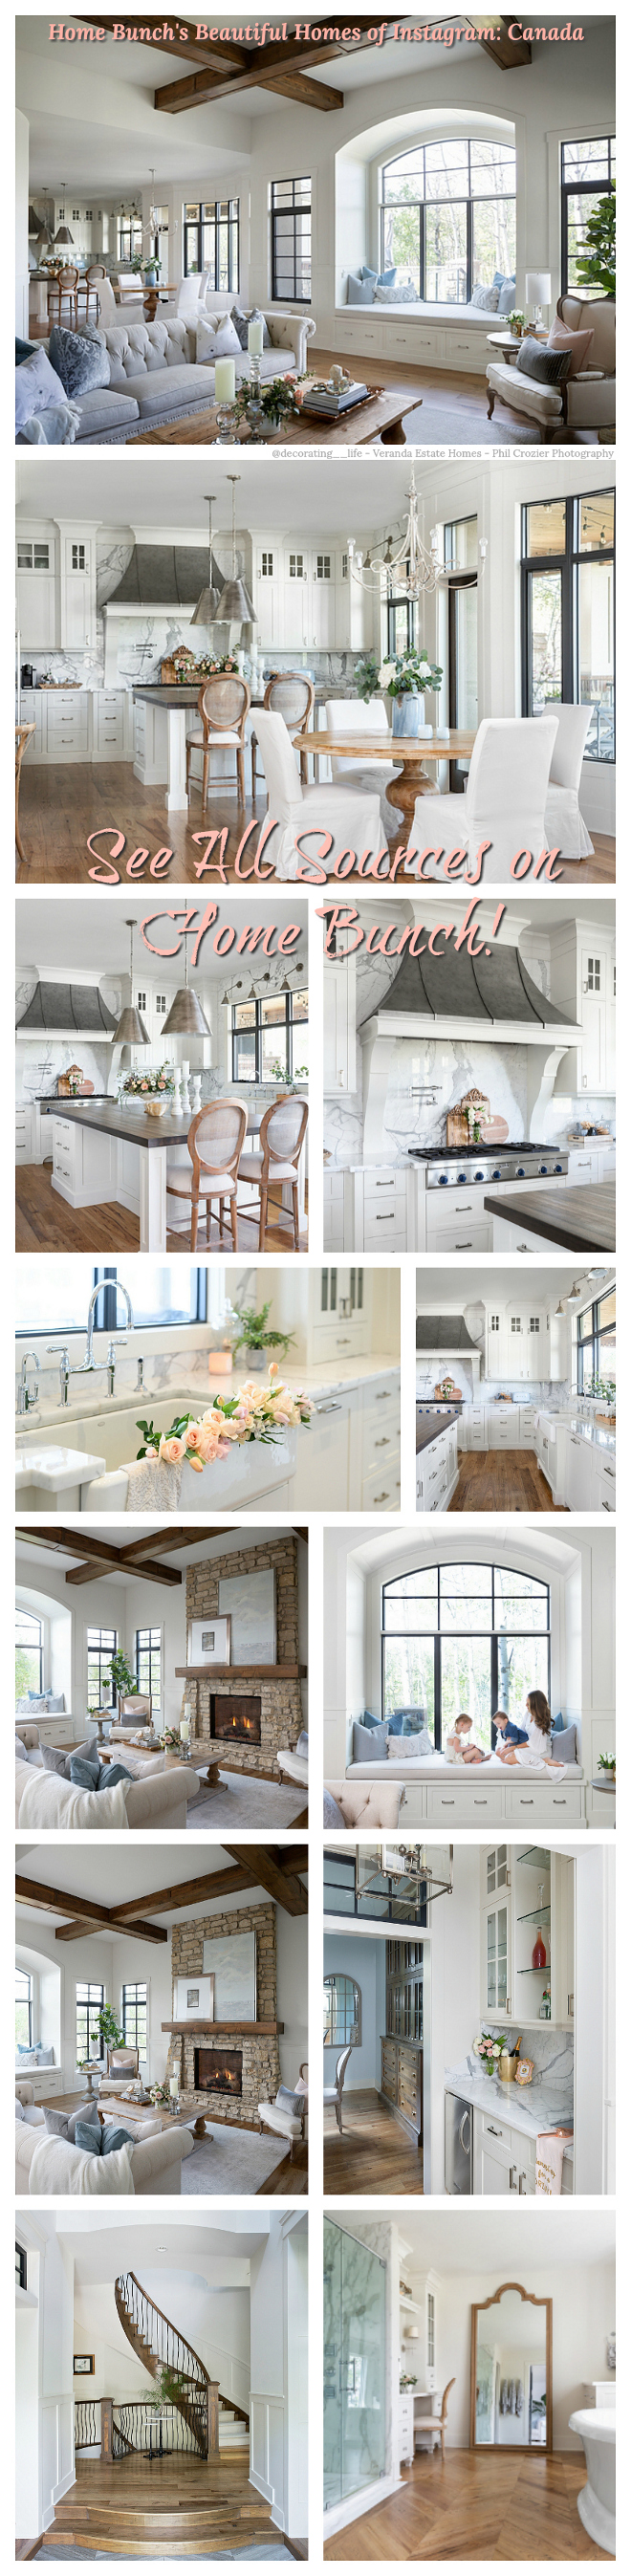 Home Bunch's Beautiful Homes of Instagram Canada Home Bunch's Beautiful Homes of Instagram Canada Home Bunch's Beautiful Homes of Instagram Canada #HomeBunch #BeautifulHomesofInstagram #Canada